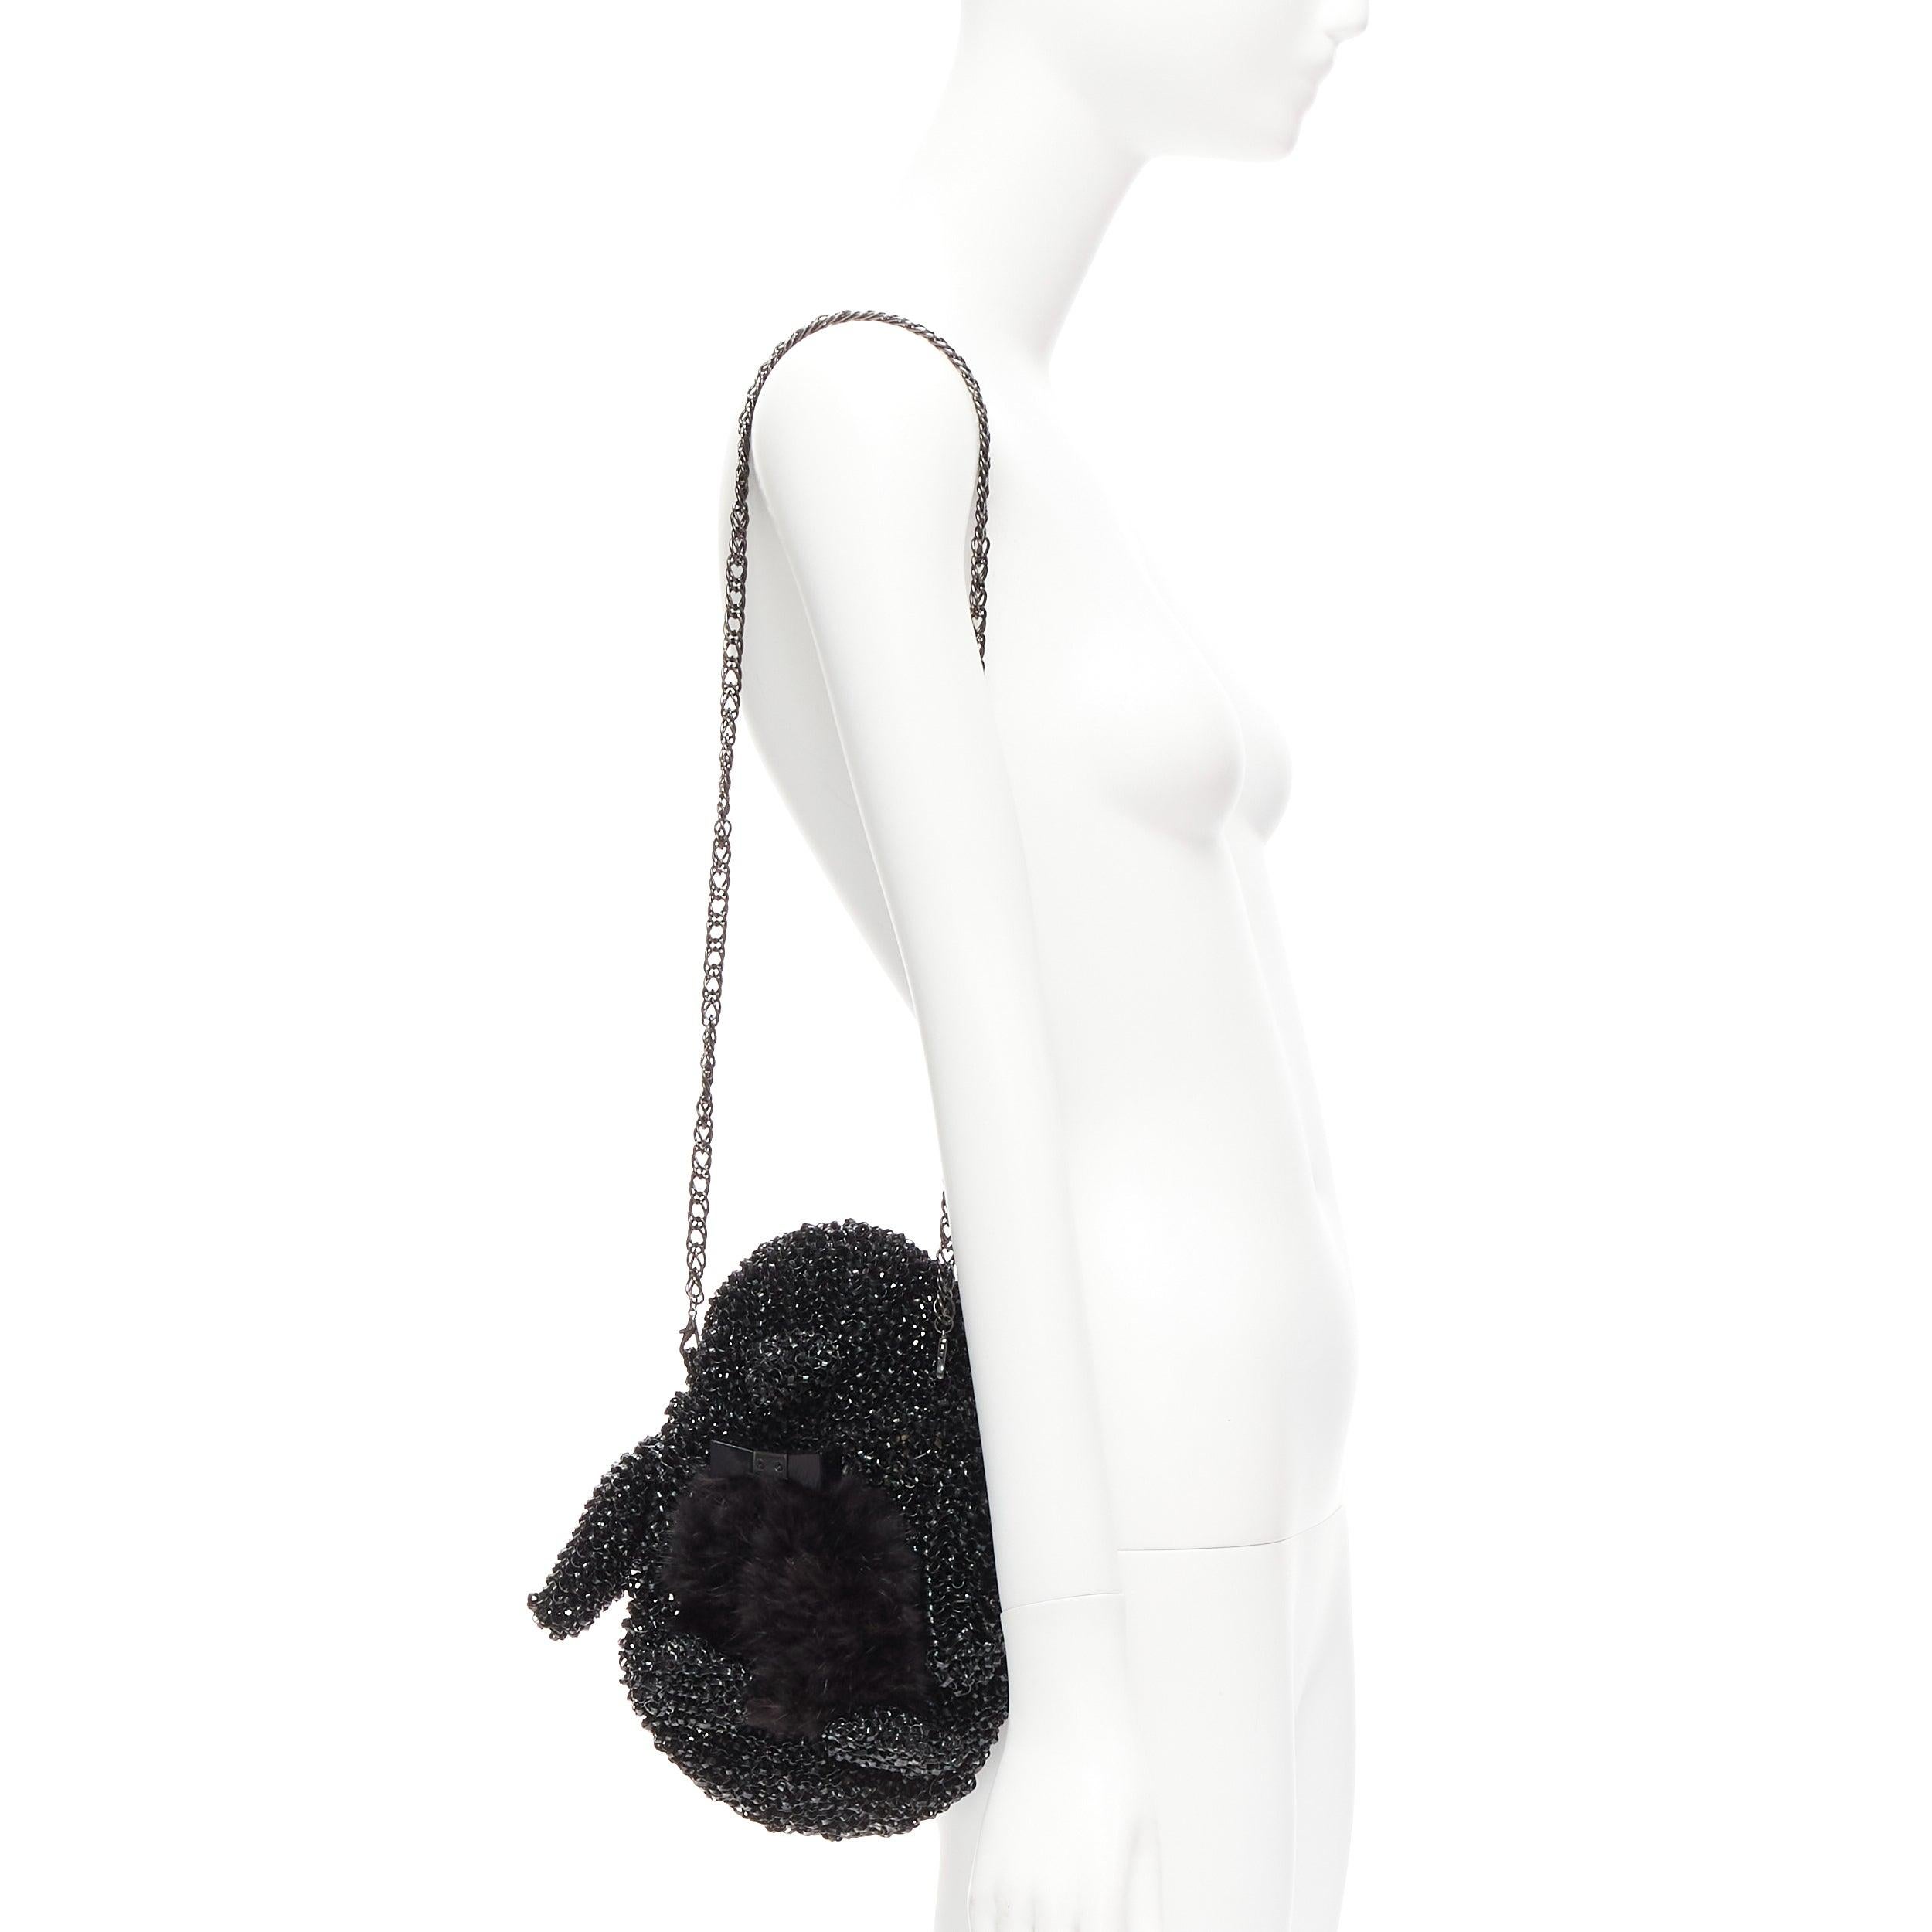 rare ANTEPRIMA Wire Bag black fur belly woven acrylic penguin chain crossbody
Reference: ANWU/A01061
Brand: Anteprima
Collection: Wire Bag
Material: Plastic
Color: Black
Pattern: Solid
Closure: Zip
Extra Details: Back zip. Fur and acrylic bowtie